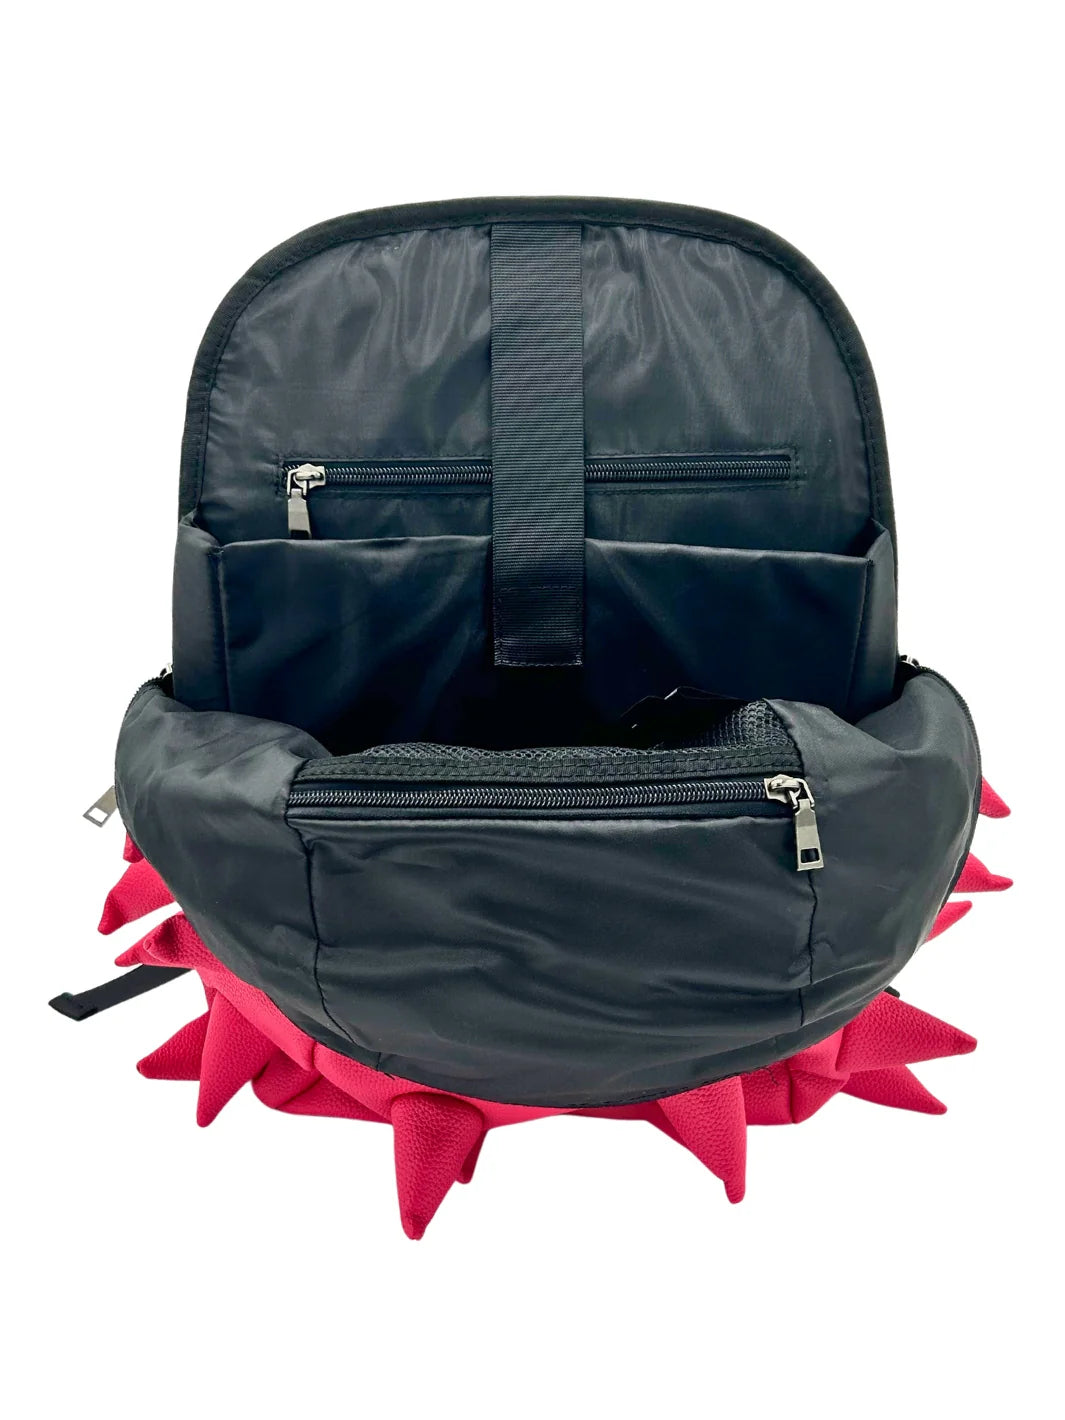 Madpax Spike - Think Pink Backpack